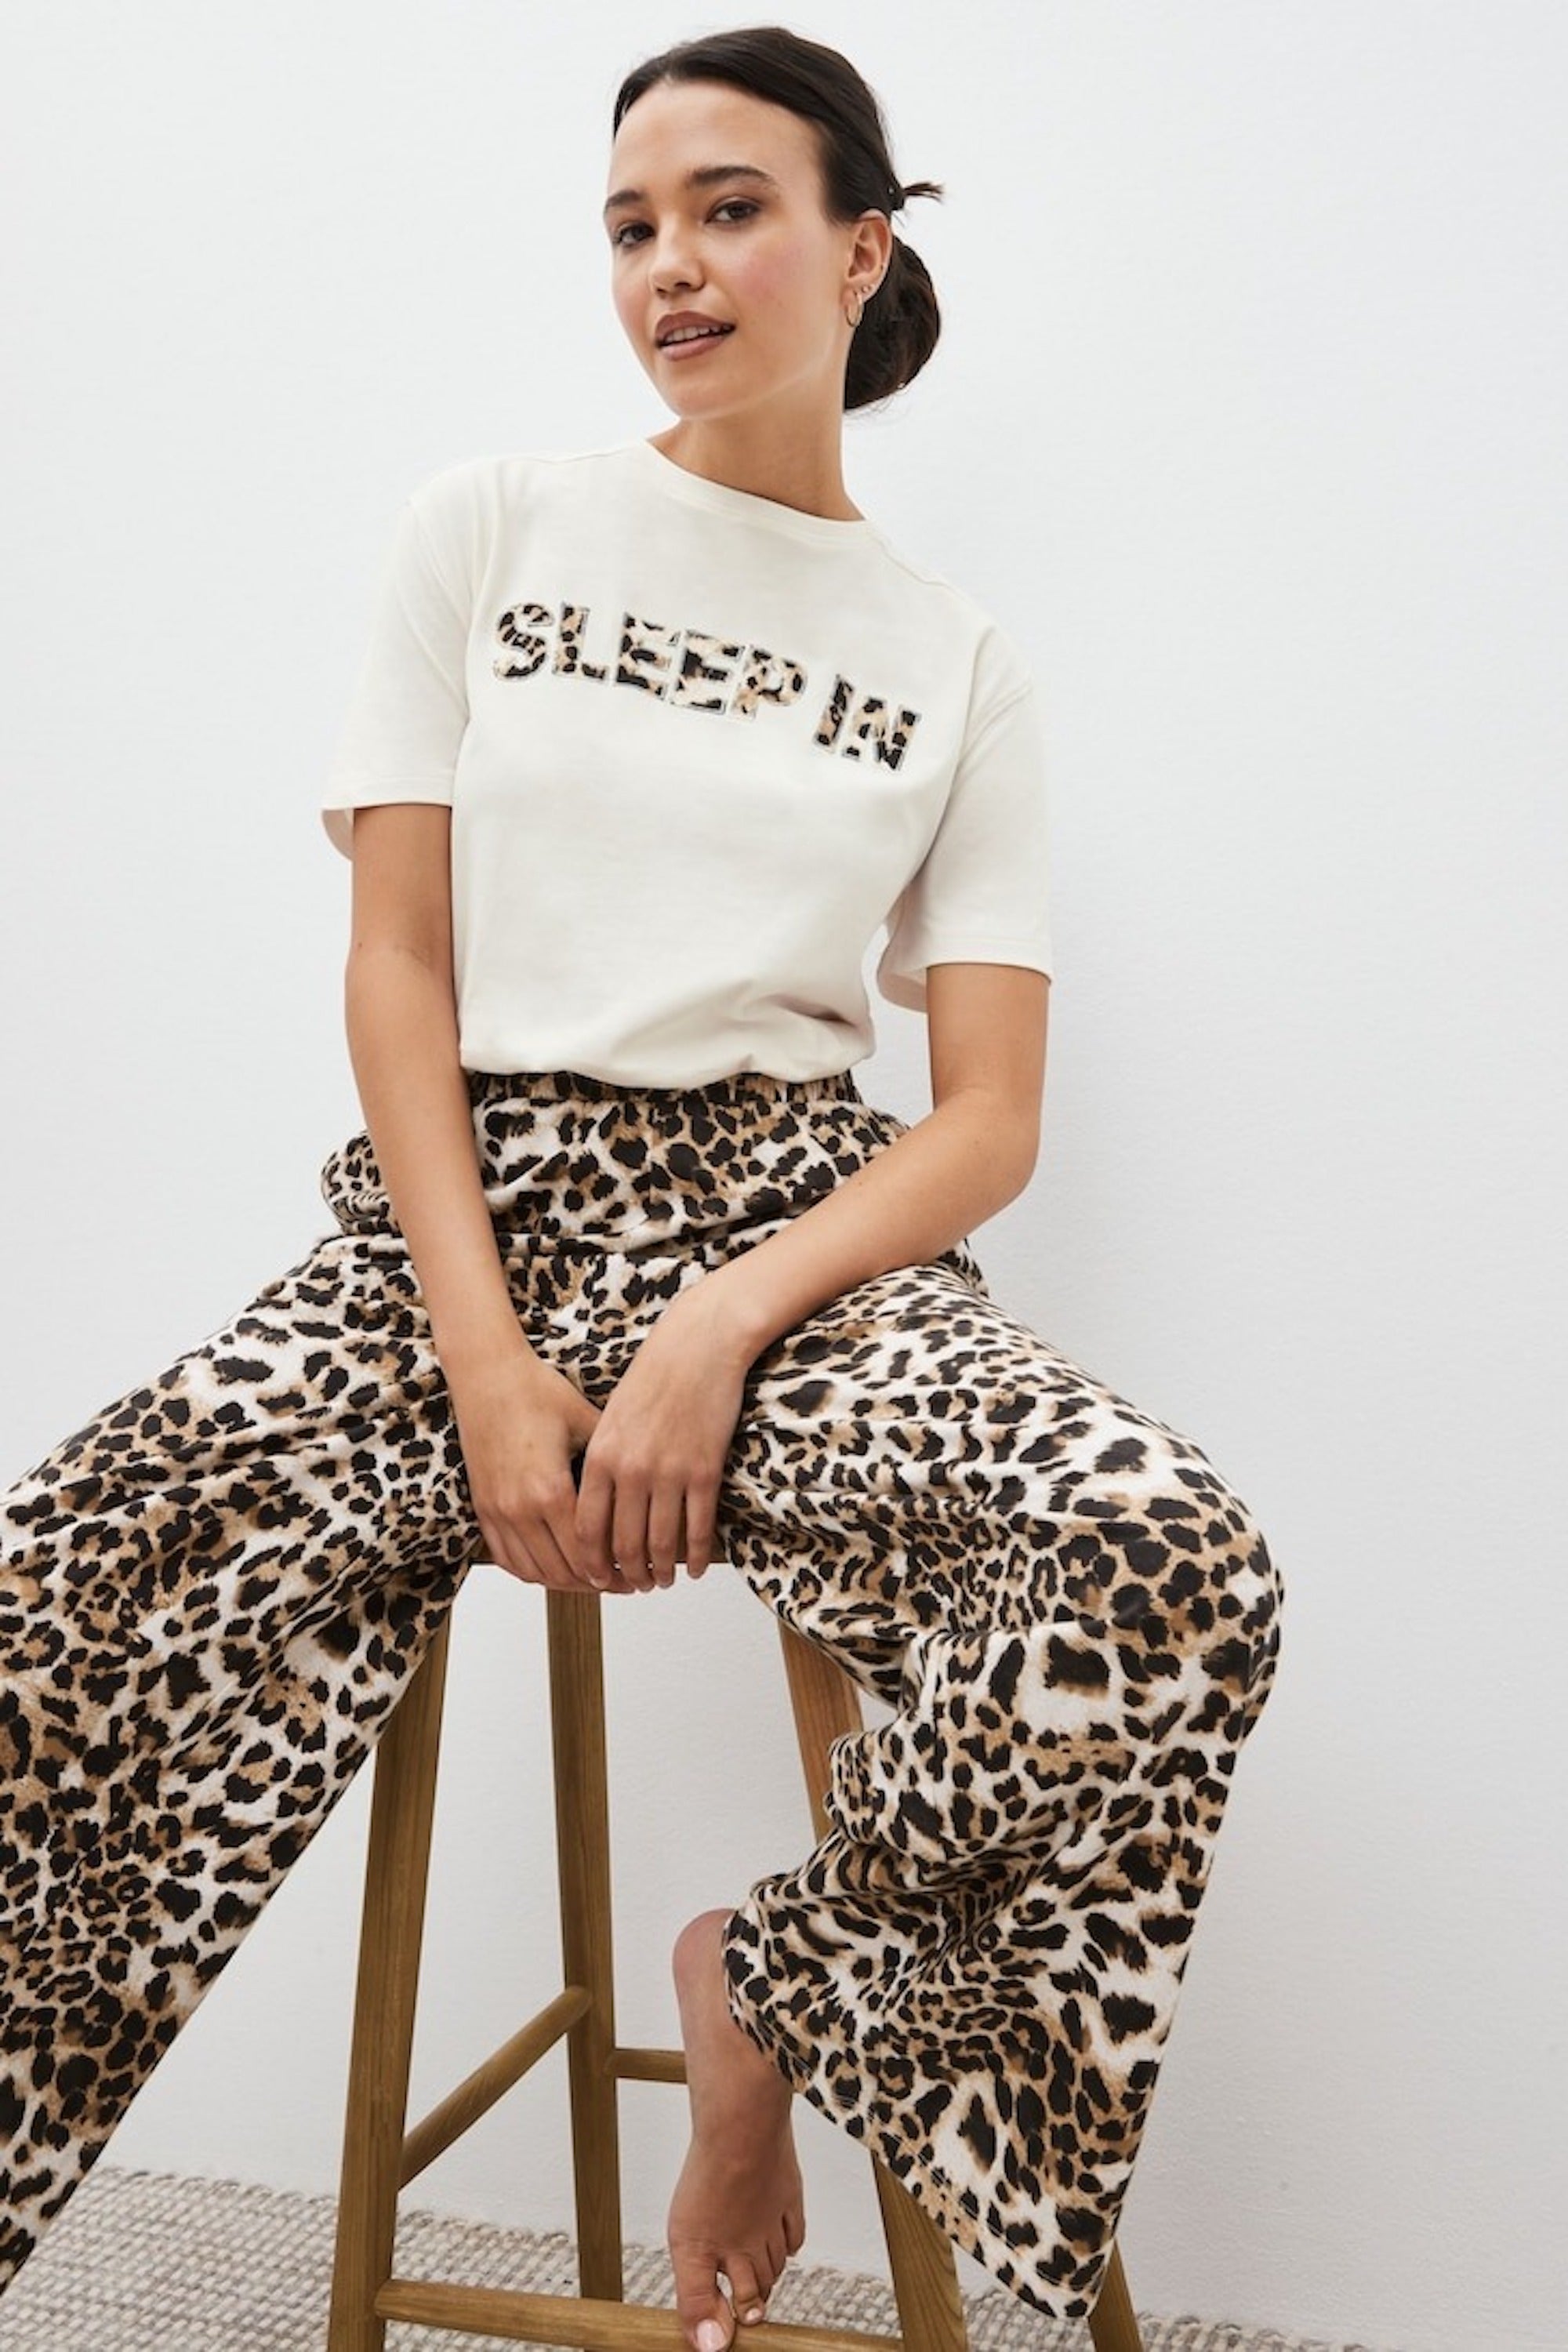 Leopard Prints Are Taking Over Menswear and These Are the Best